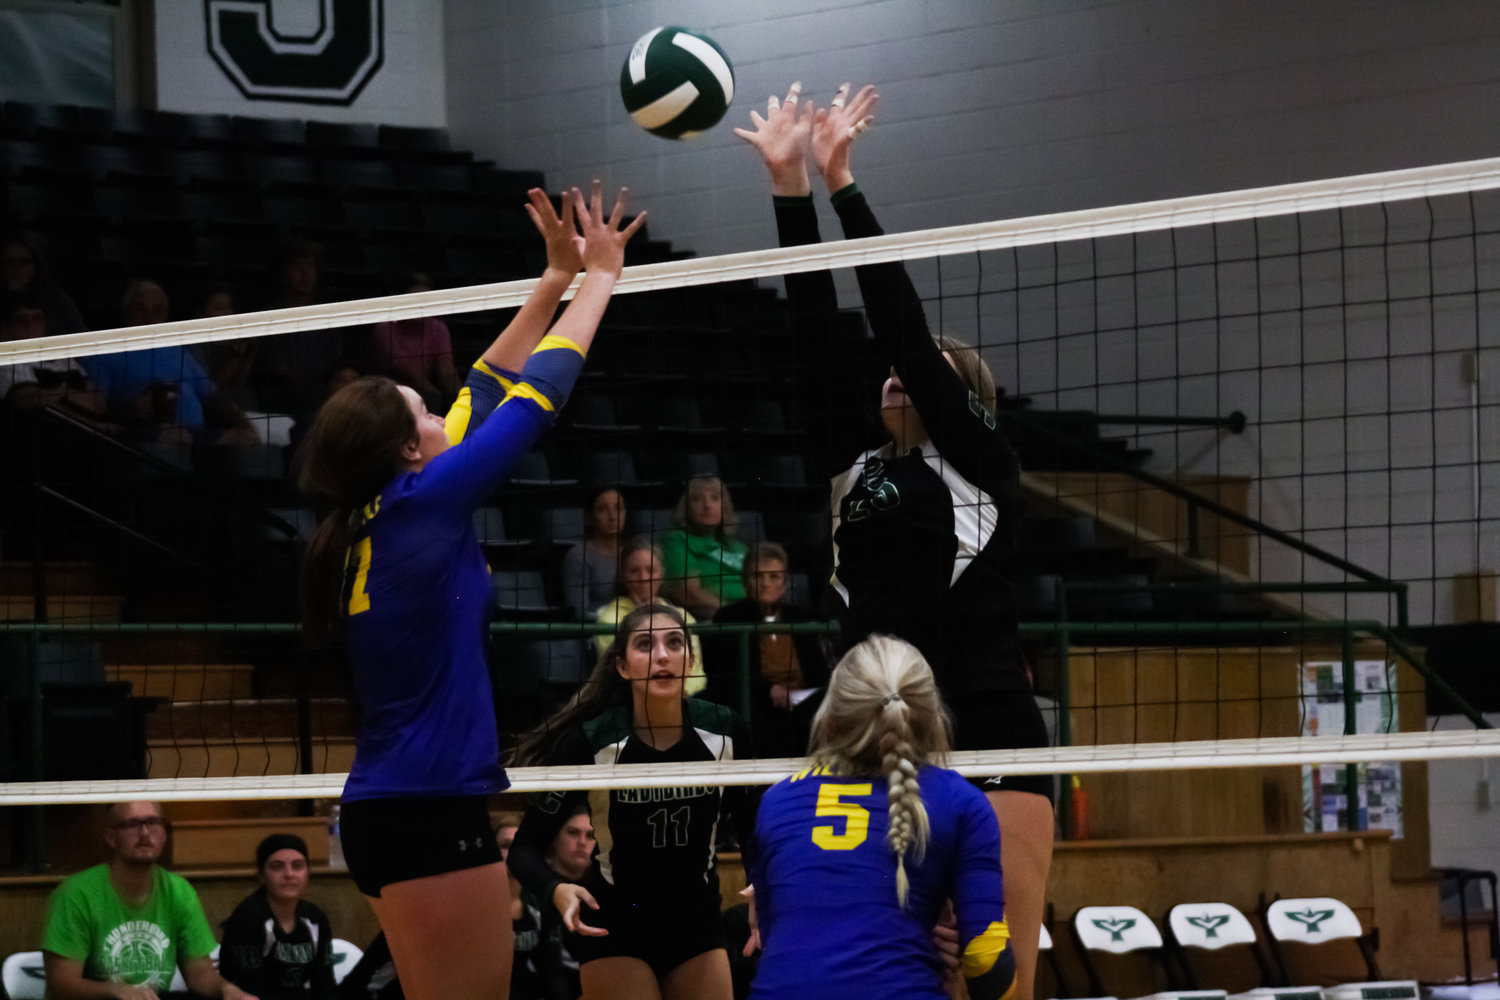 North Callaway sophomore middle blocker Bailey Hill stuffs a Wright City hitter Tuesday in the Ladybirds' five-set win in Kingdom City.